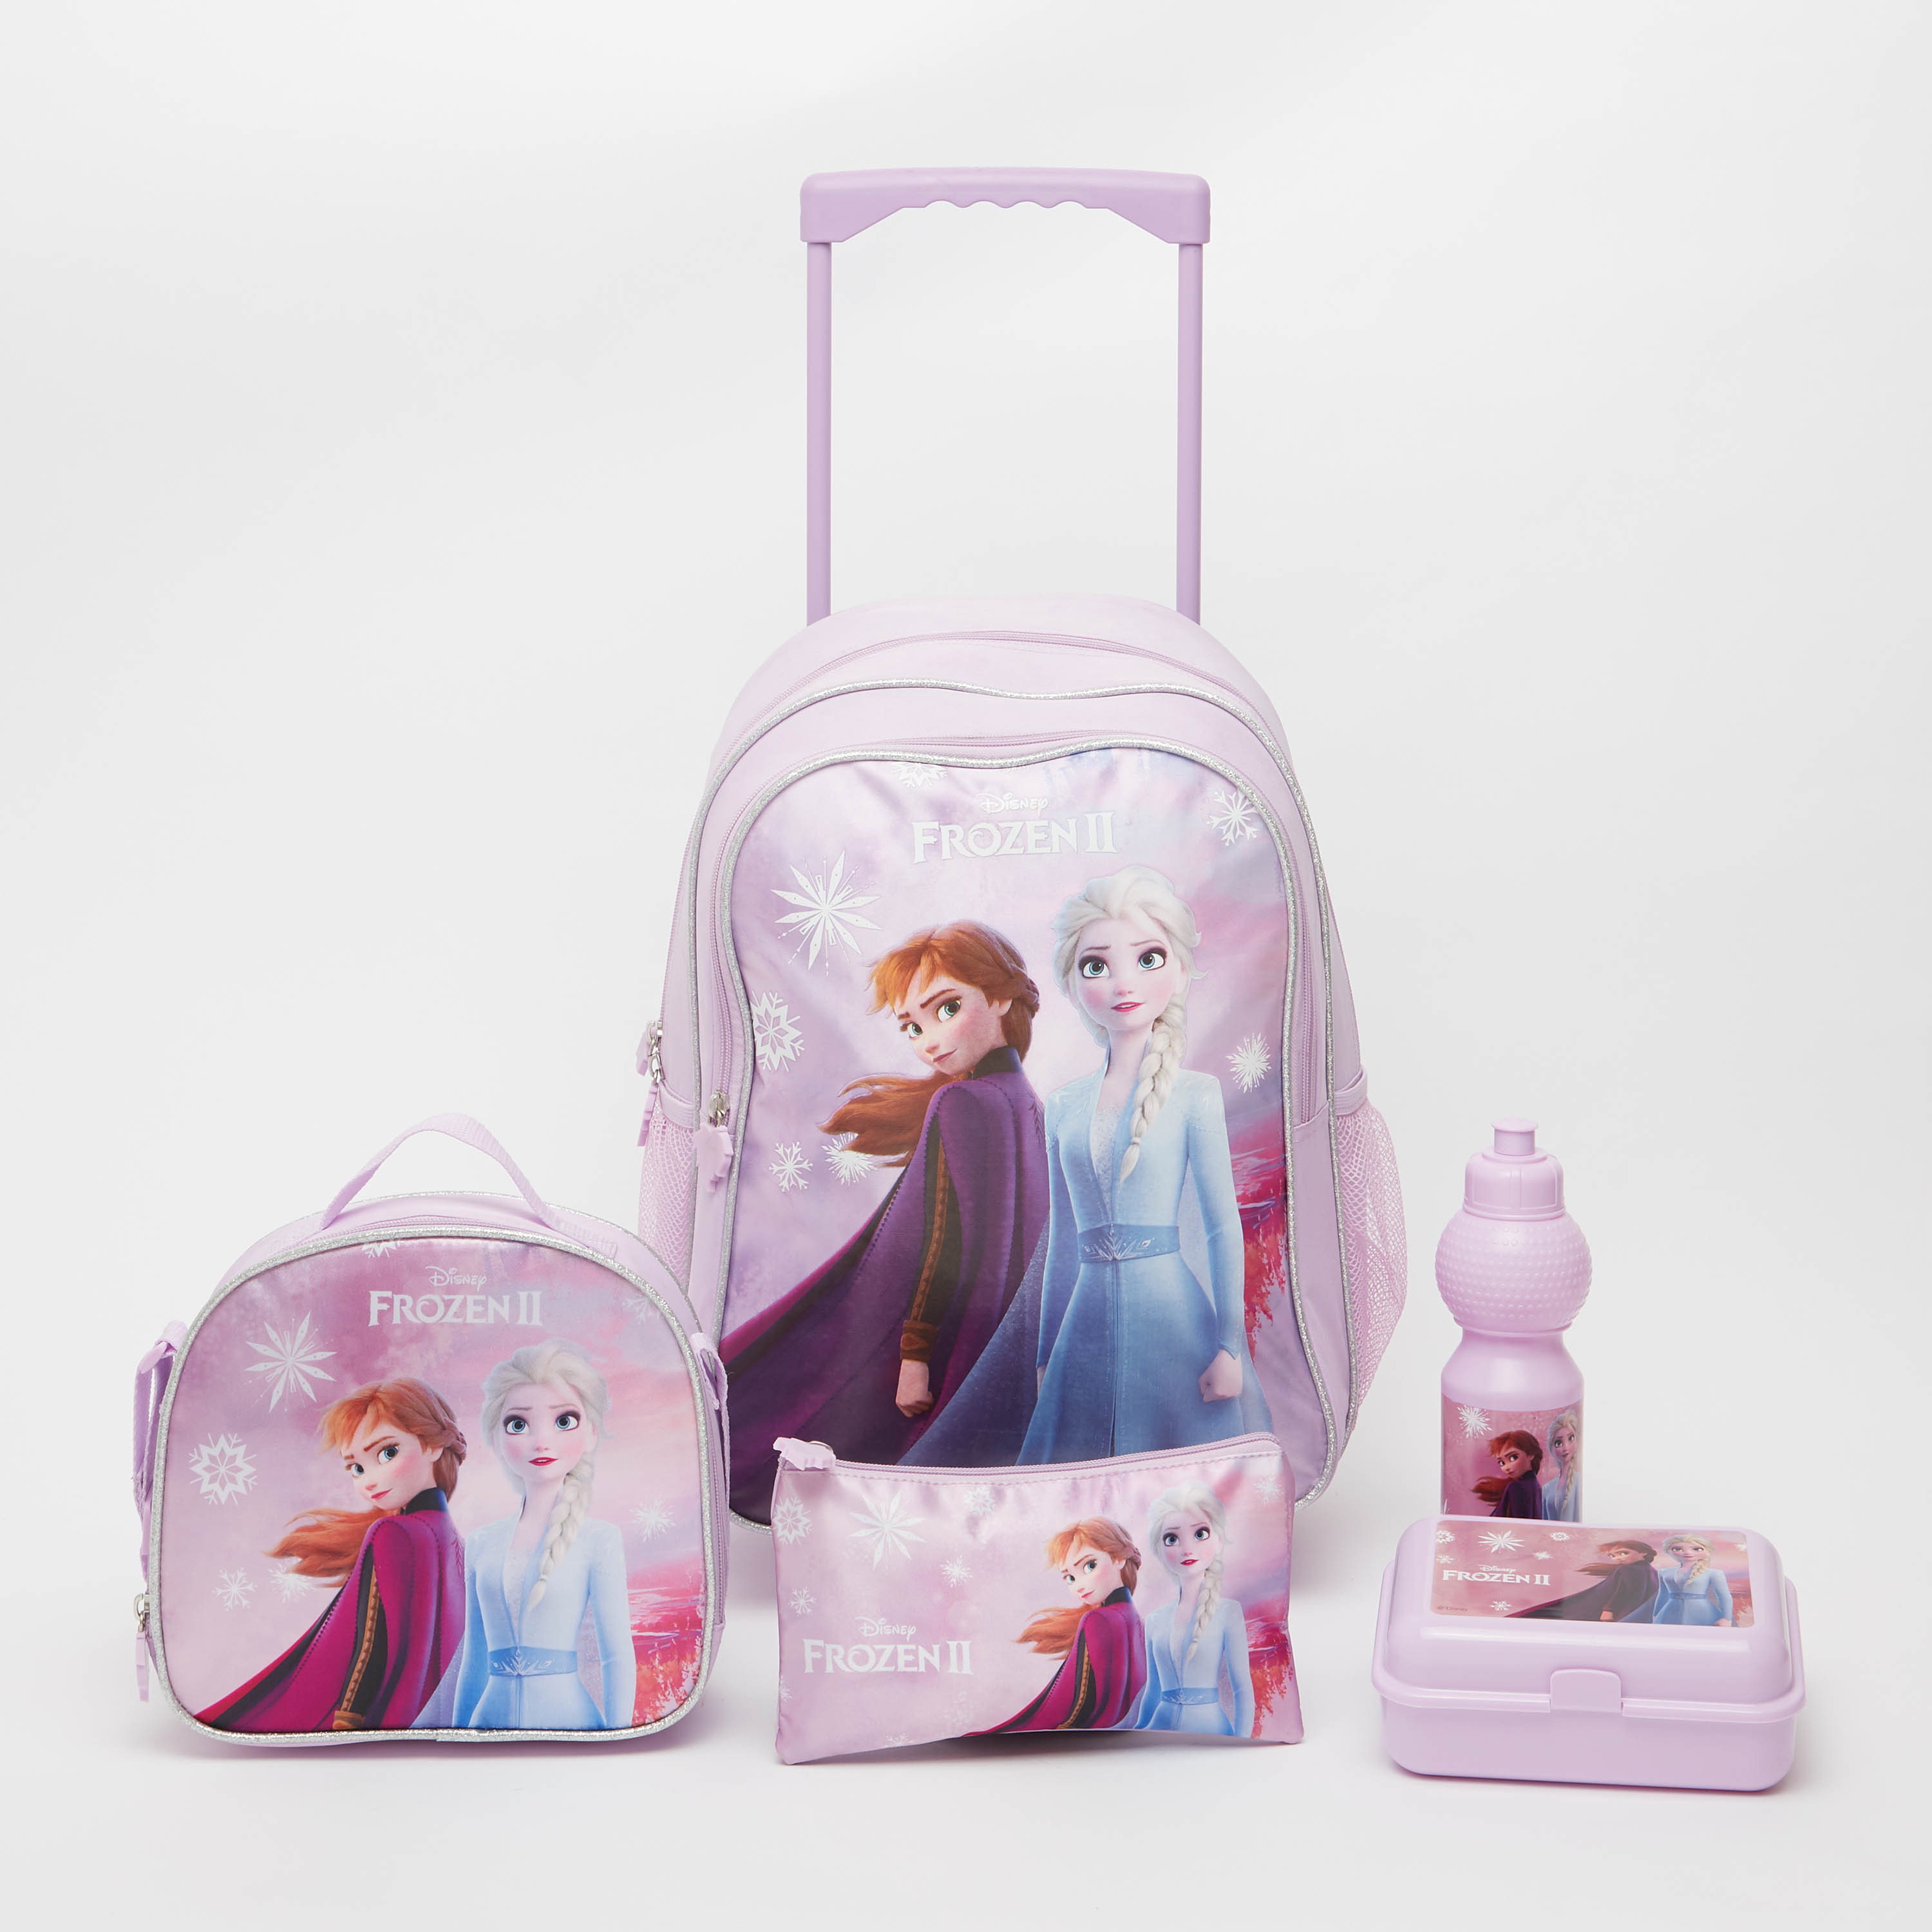 Kids Lunch Bag - Frozen - WBG0776 - WBG0776 at Rs 90.30 | Gifts for all  occasions by Wedtree